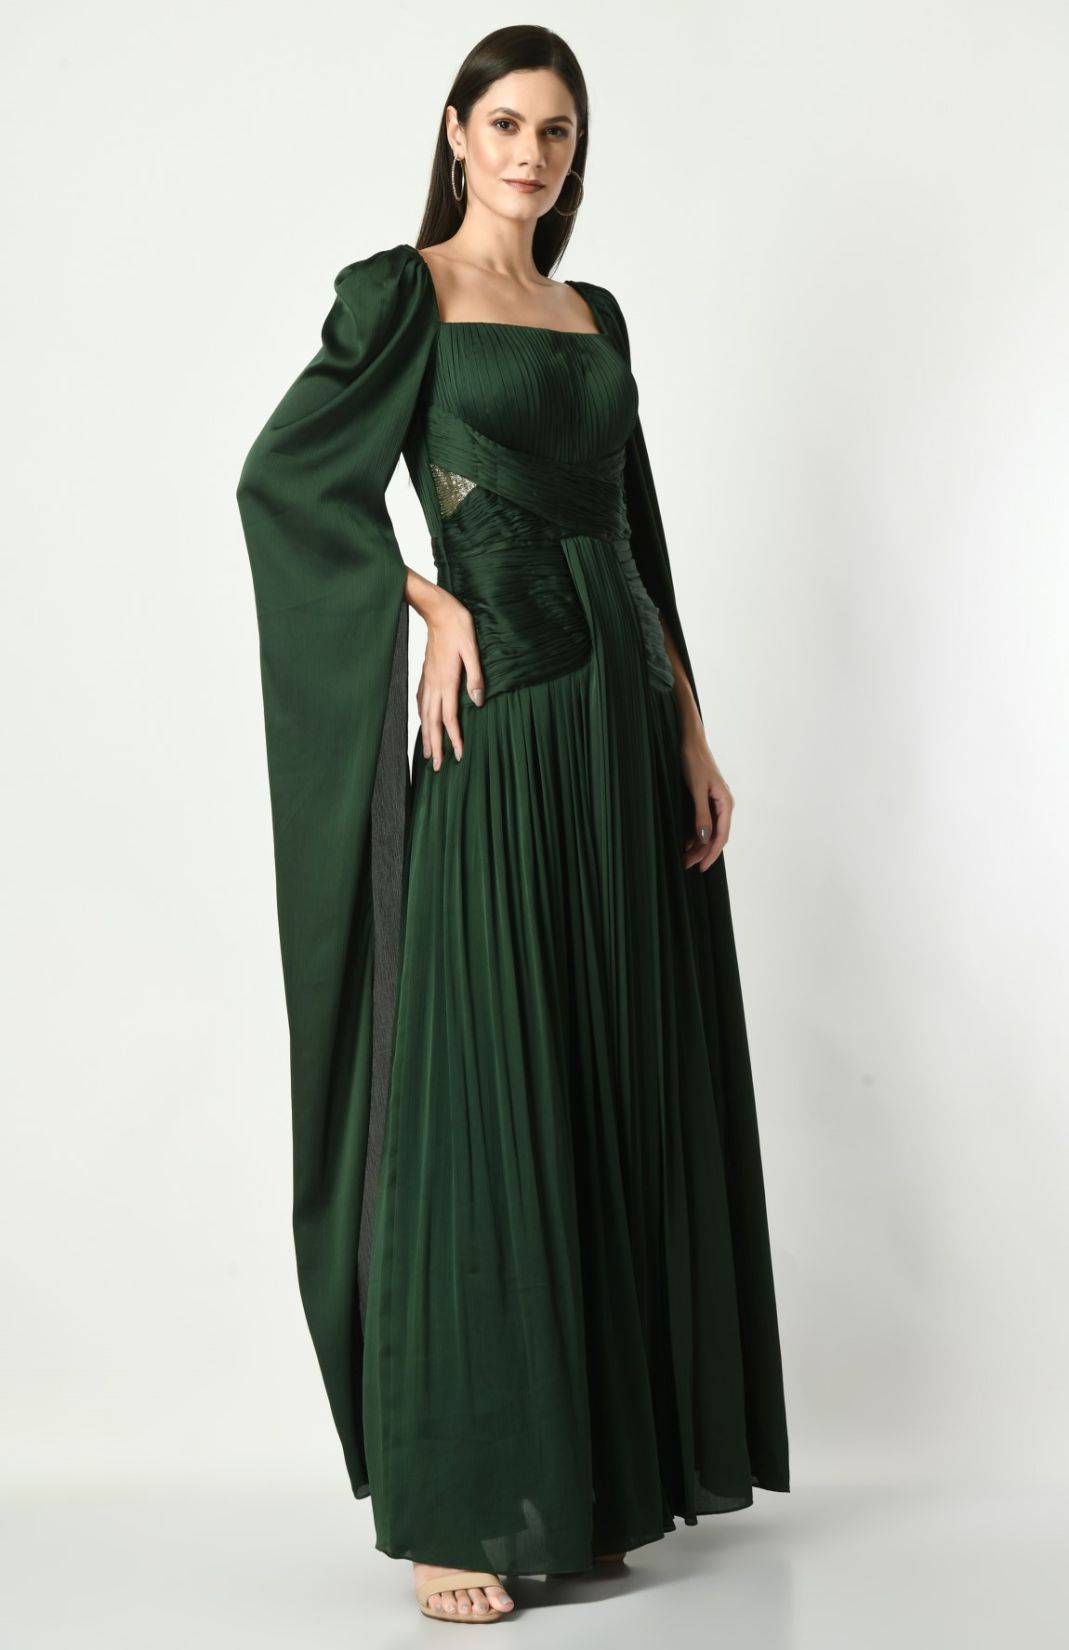 Unspoken Beauty - Rusching Gown In Bottle Green Color With Bag Sleeves 